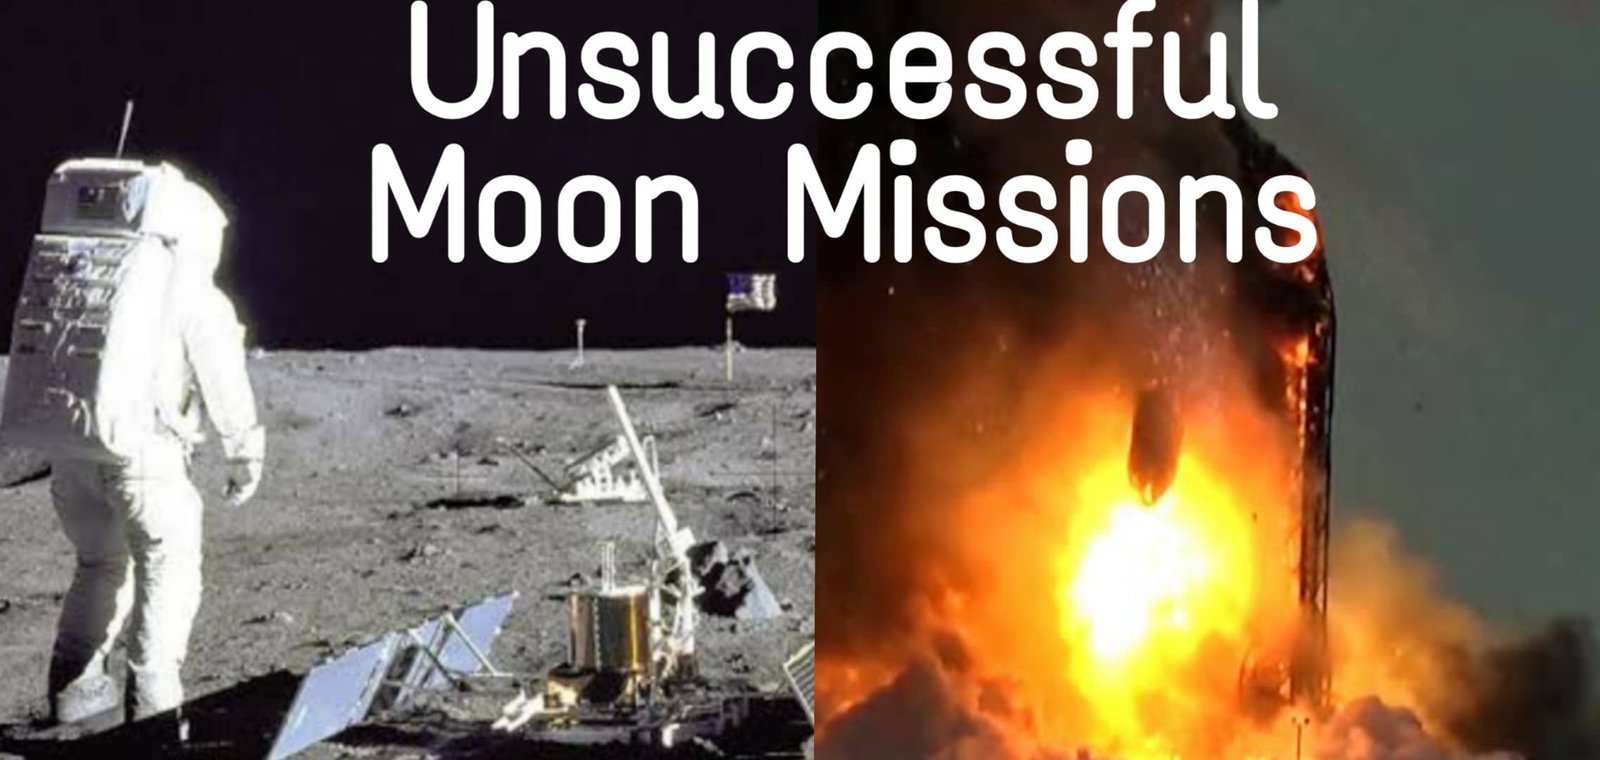 Moon missions